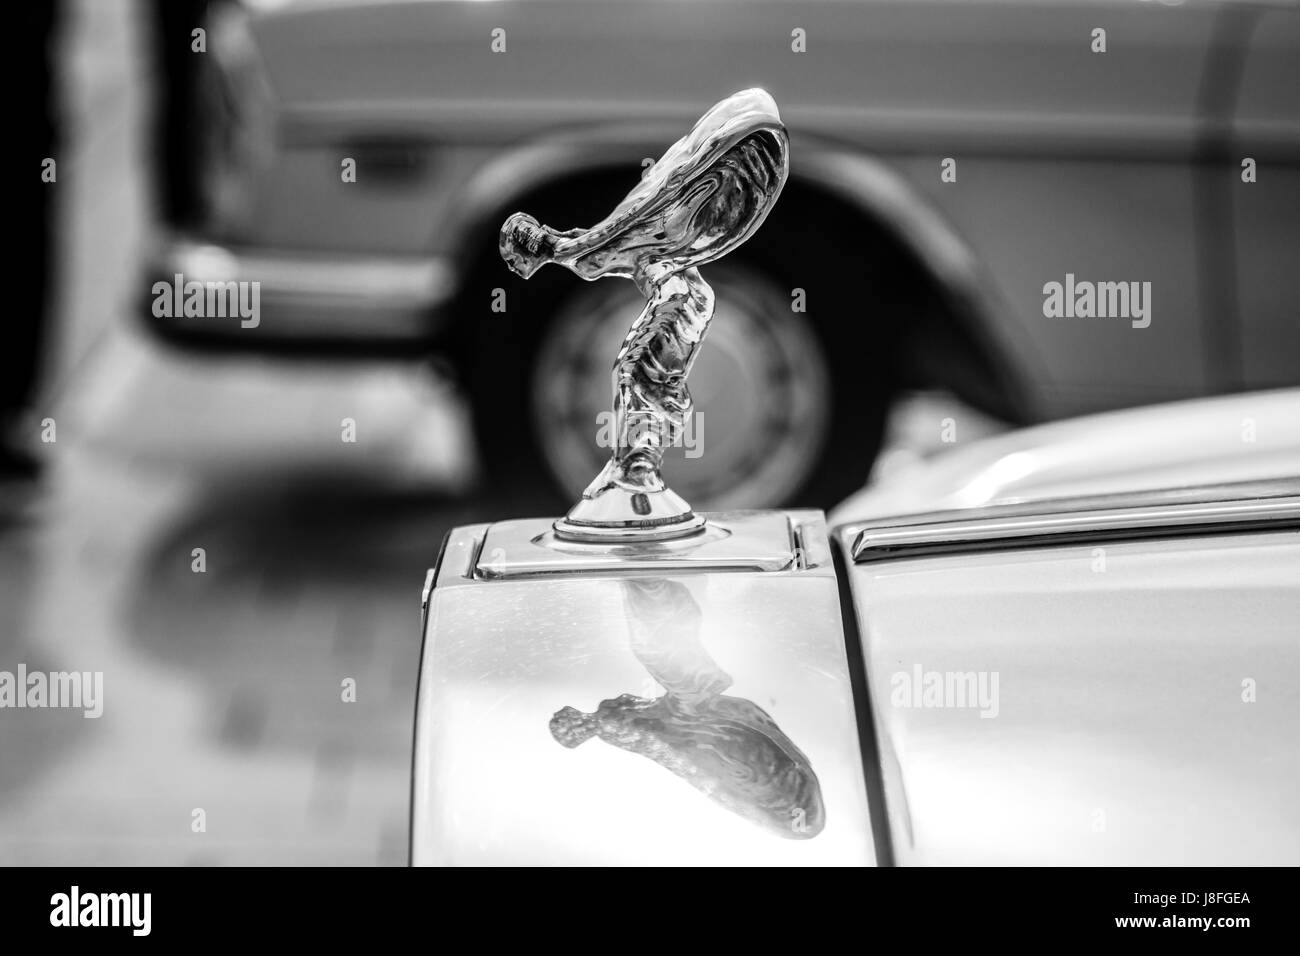 STUTTGART, GERMANY - MARCH 04, 2017: The famous emblem 'Spirit of Ecstasy' on the Rolls-Royce Silver Spirit. Black and white. Europe's greatest classi Stock Photo